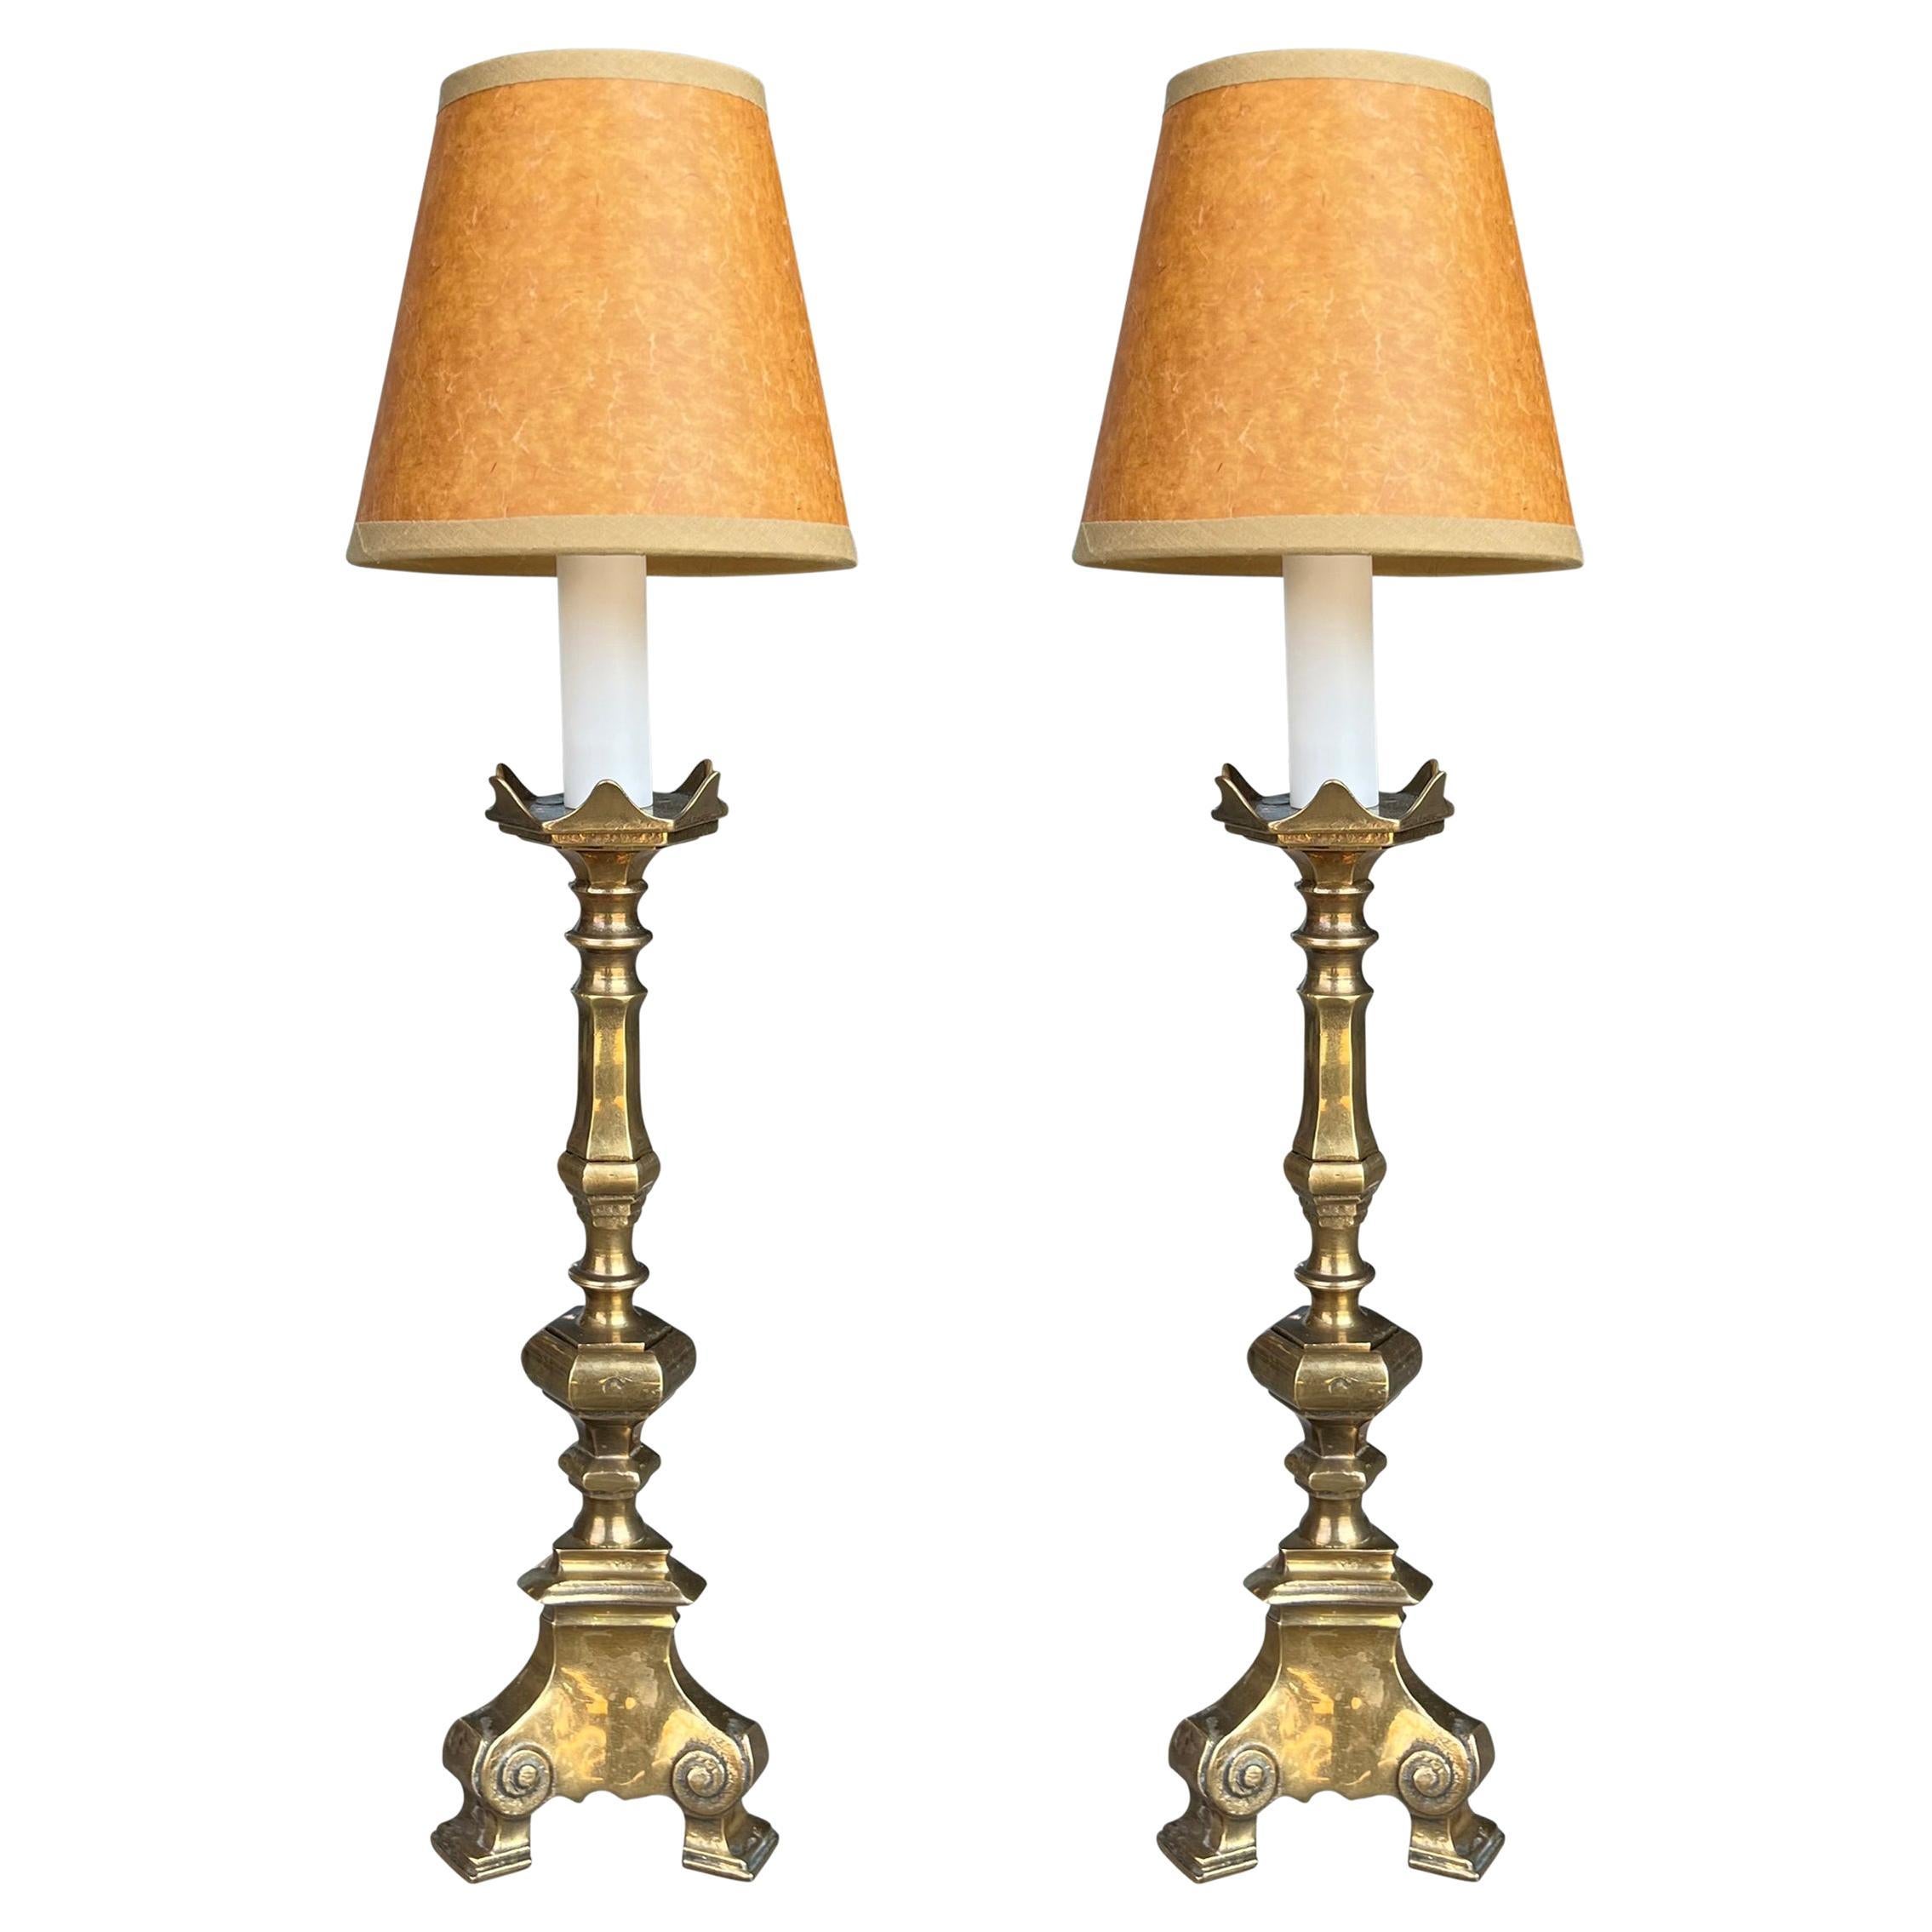 Pair of 19th Century French Bronze Candlestick Lamps For Sale